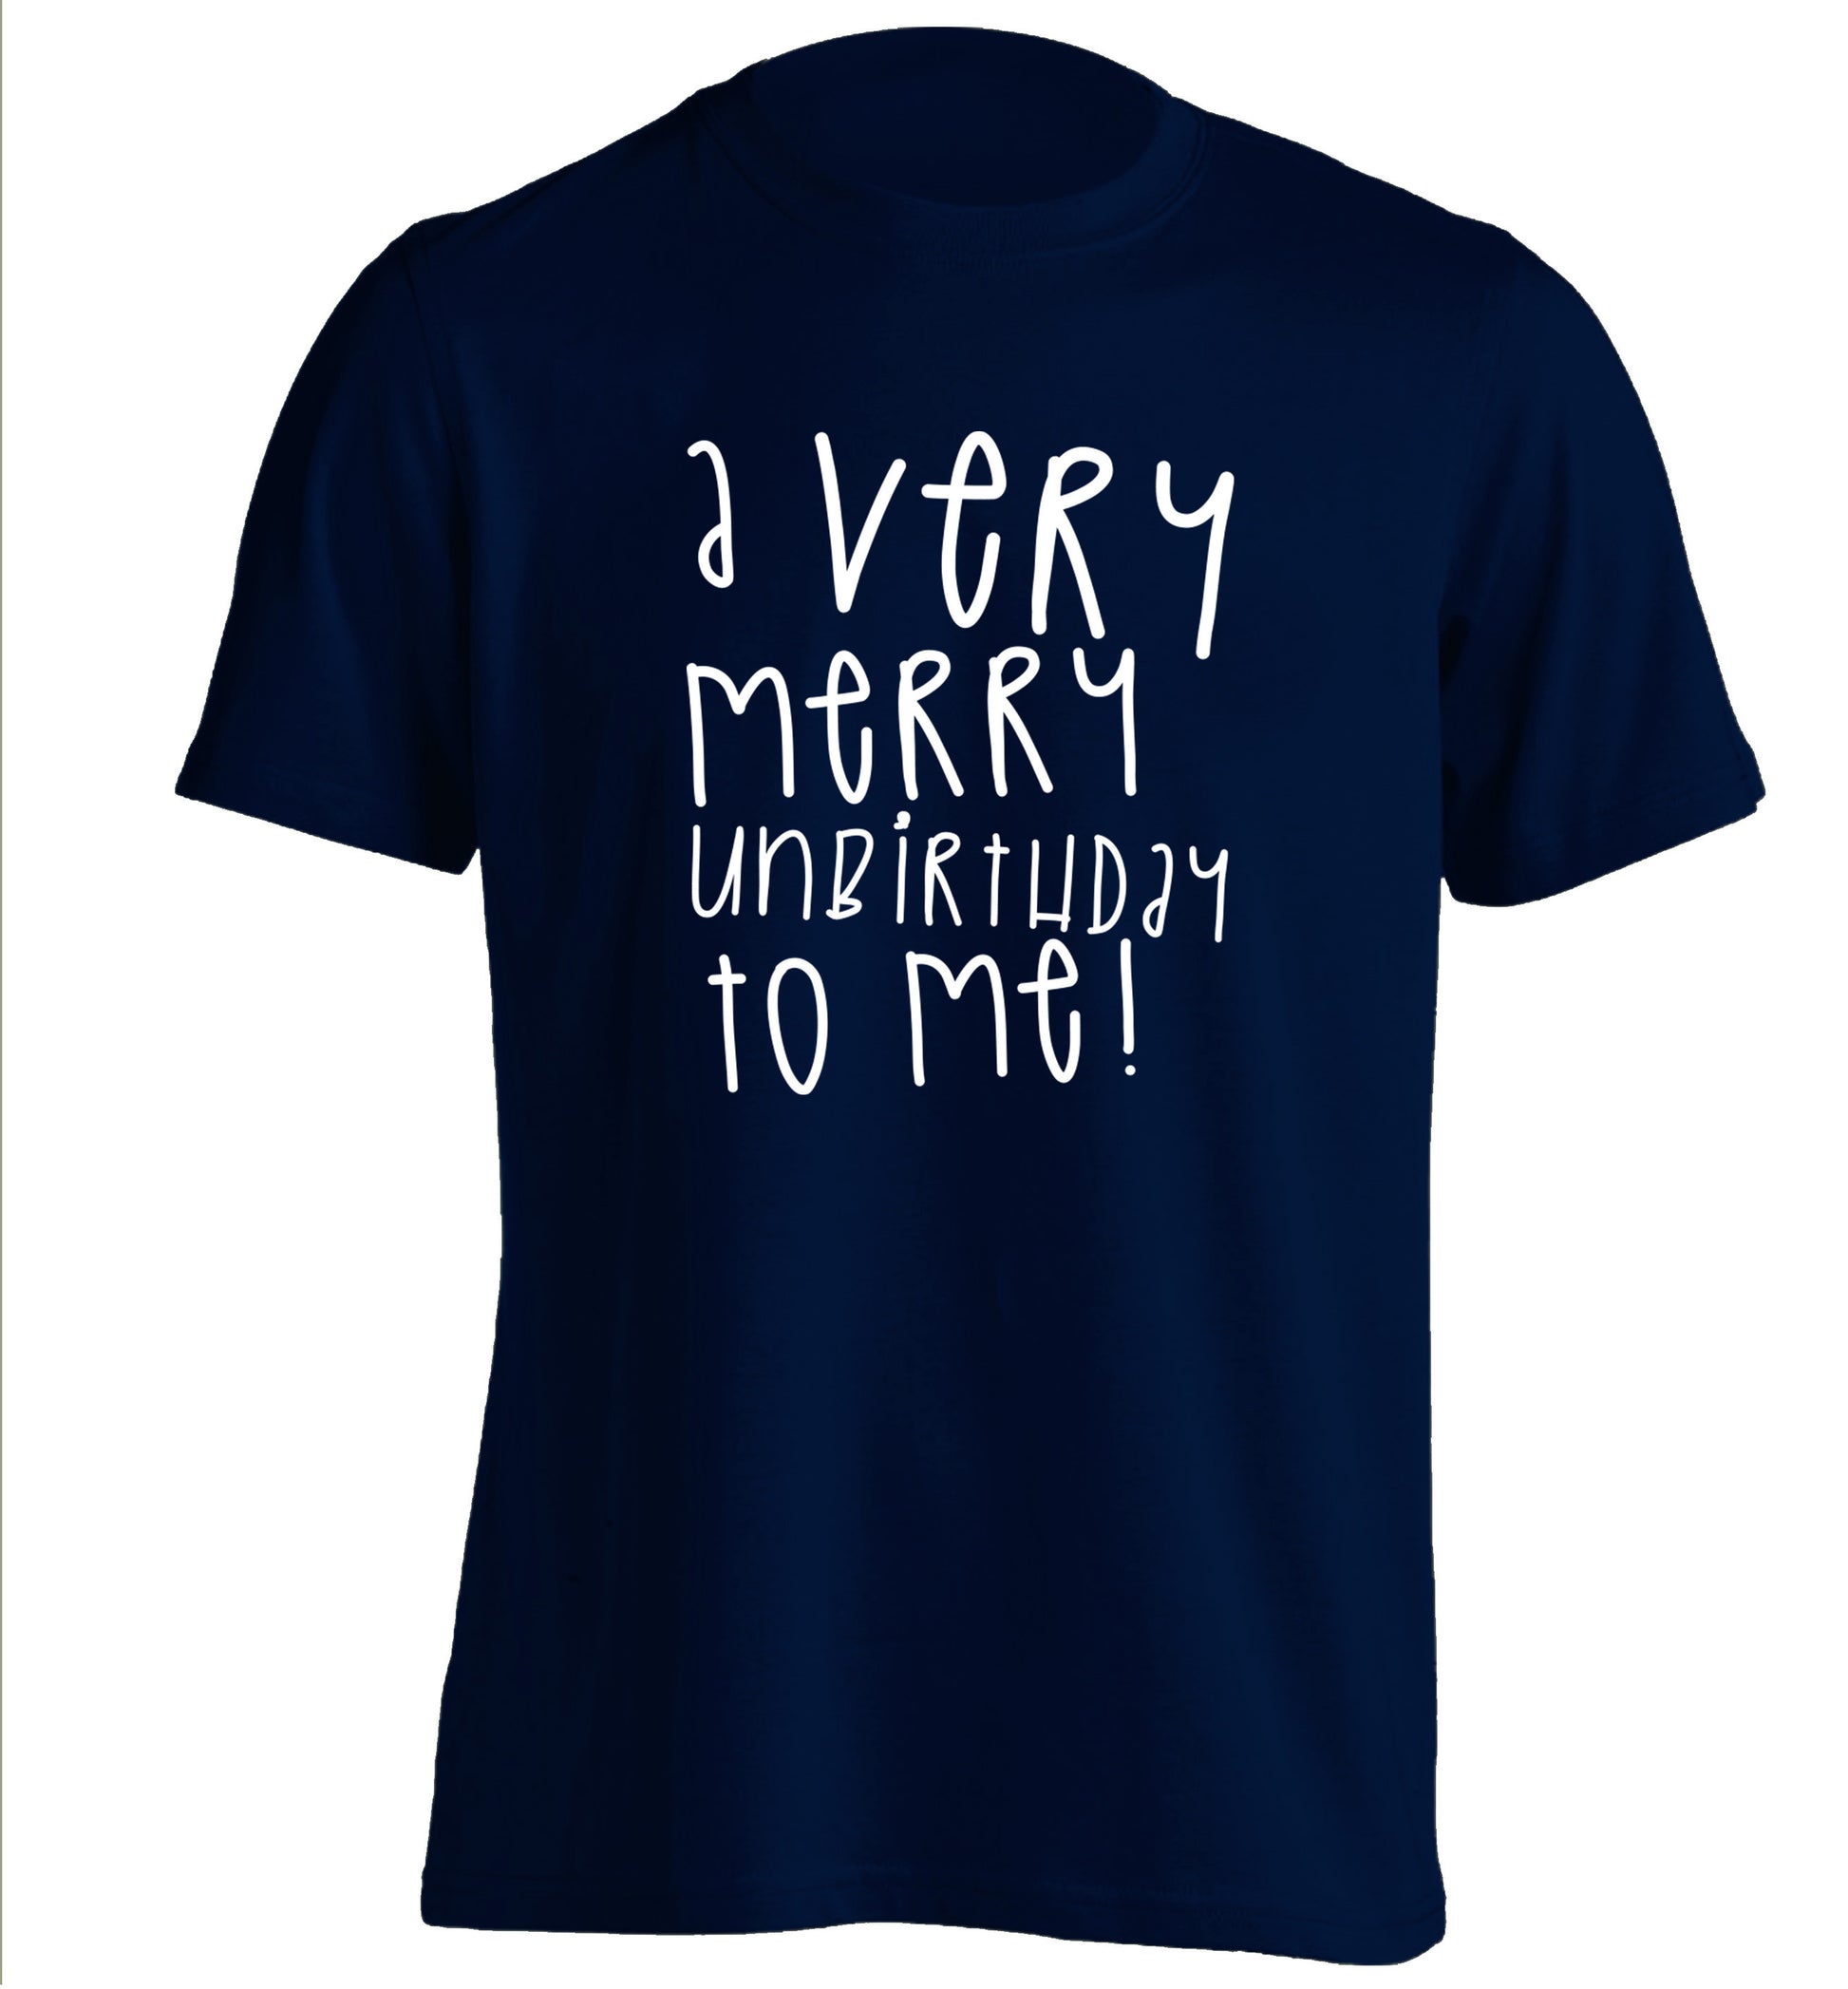 A very merry unbirthday to me! adults unisex navy Tshirt 2XL